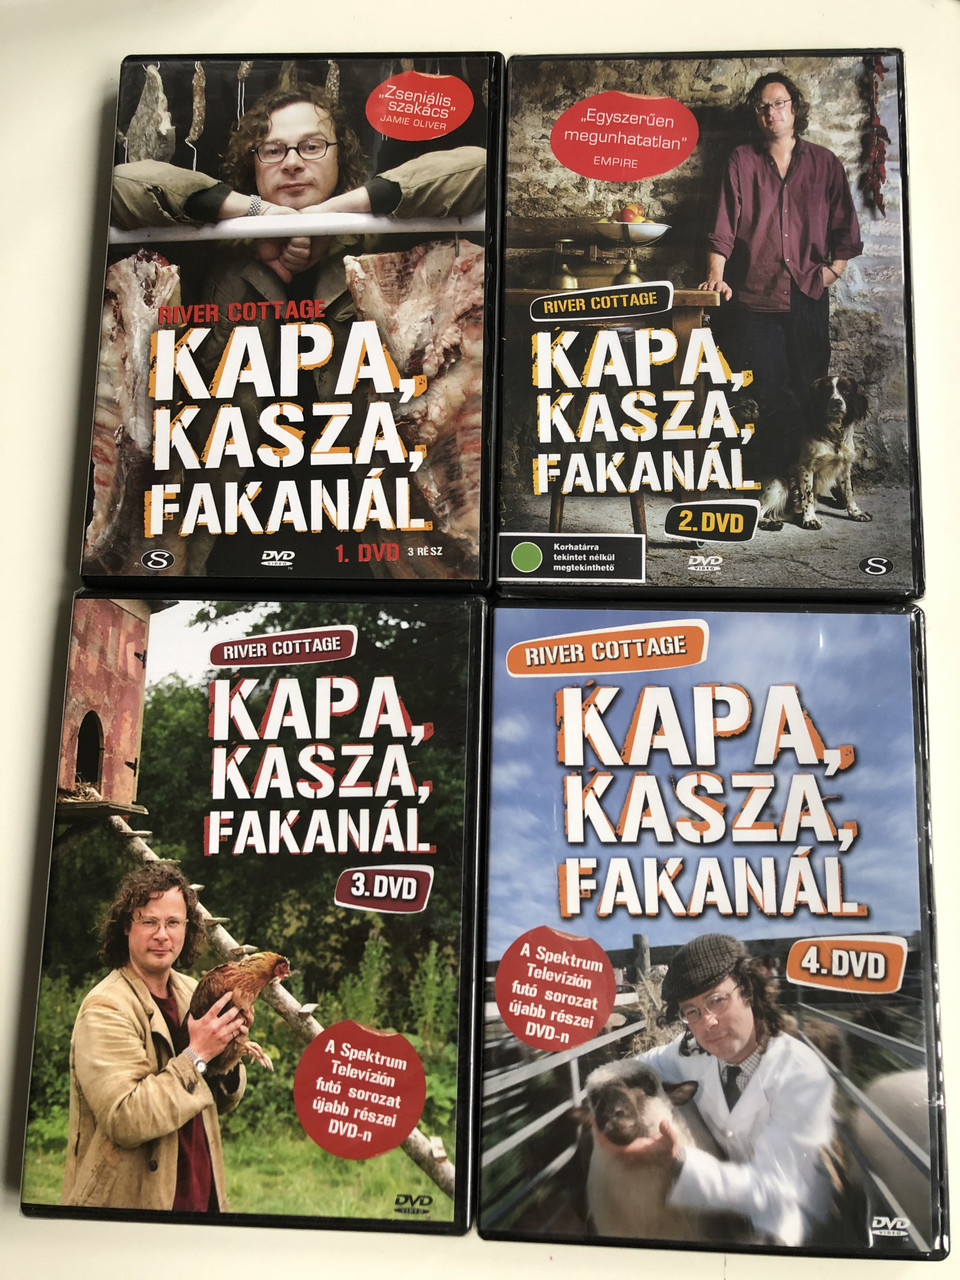 River Cottage Disc 1-4 DVD SET 1999 Kapa, kasza, fakanál 1-4 DVD / Directed  by Zam Baring, Andrew Palmer, Billy Paulett / Cooking with Hugh  Fearnley-Whittingstall / 12 Episodes 4 Discs - bibleinmylanguage